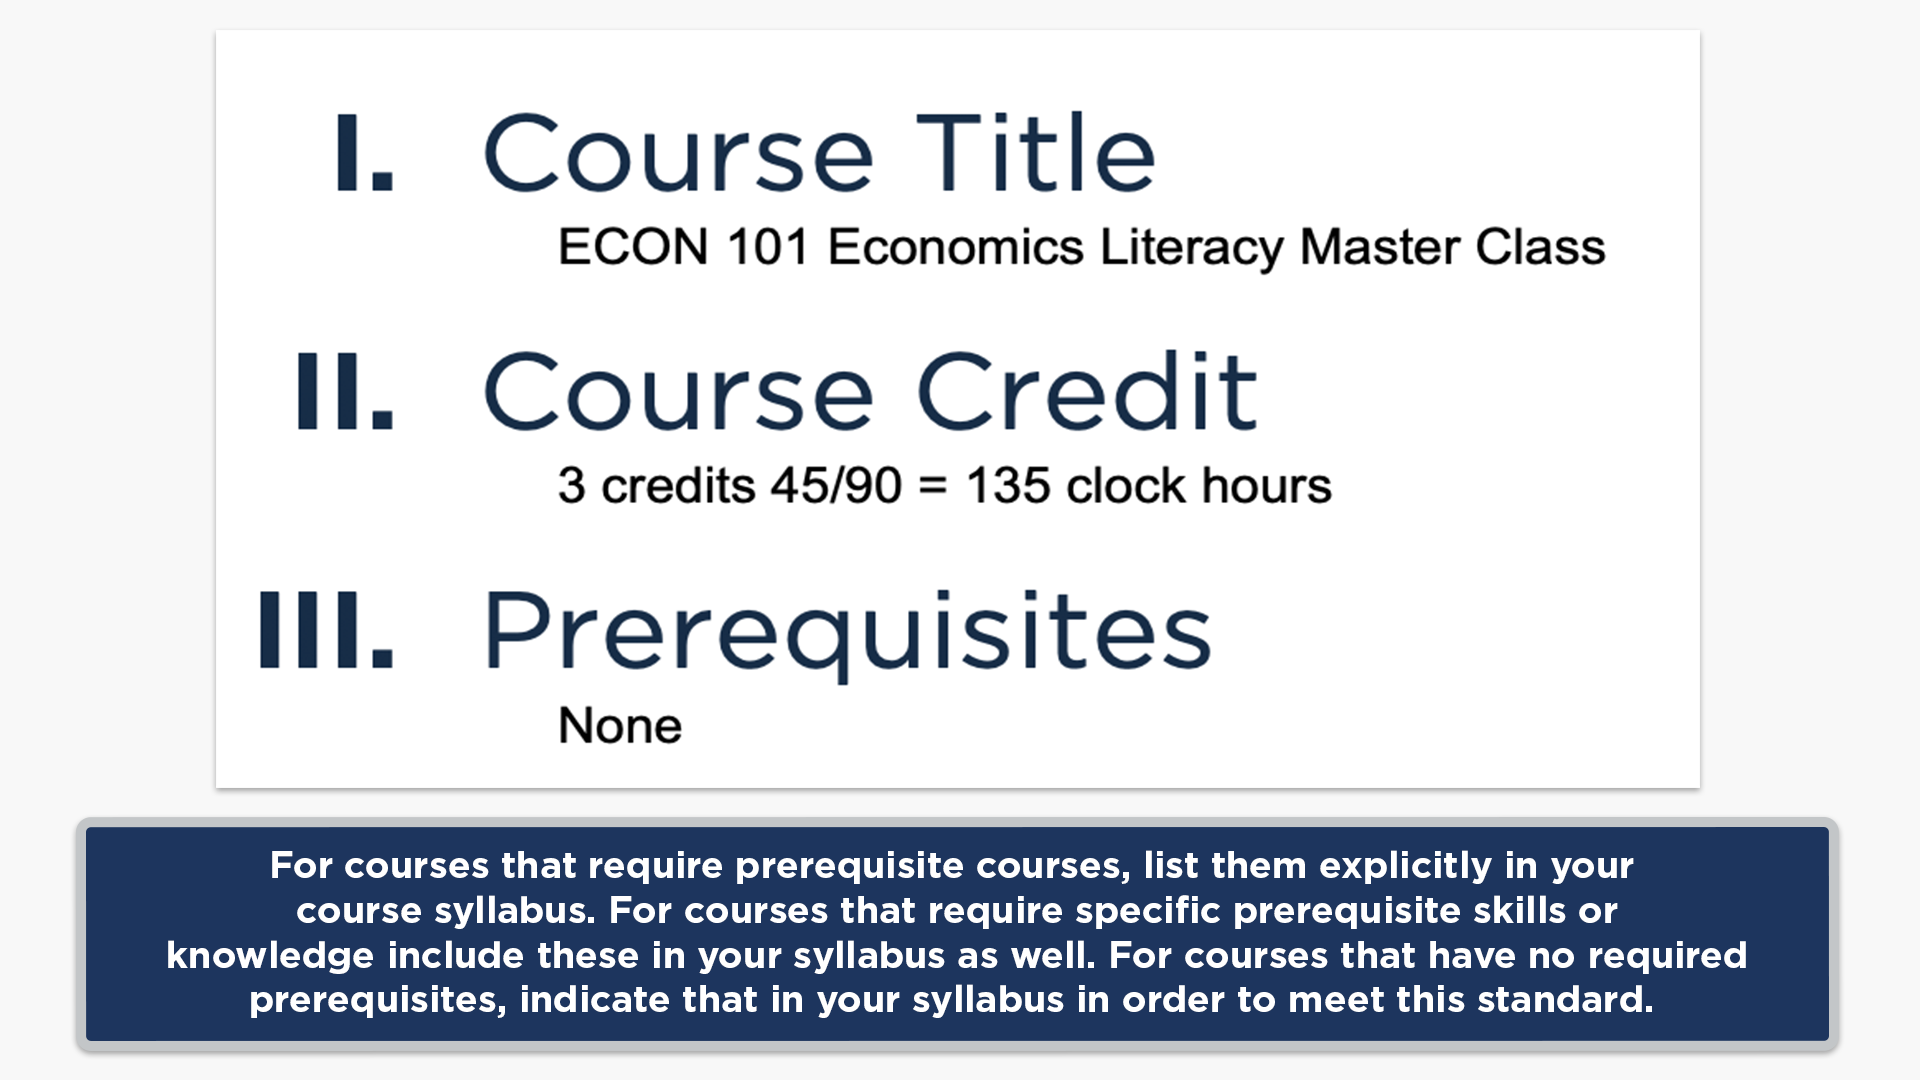 For courses that require prerequisite courses, list them explicitly in your course syllabus. For courses that require specific prerequisite skills or knowledge include these in your syllabus as well. For courses that have no required prerequisites, indicate that in your syllabus in order to meet this standard.